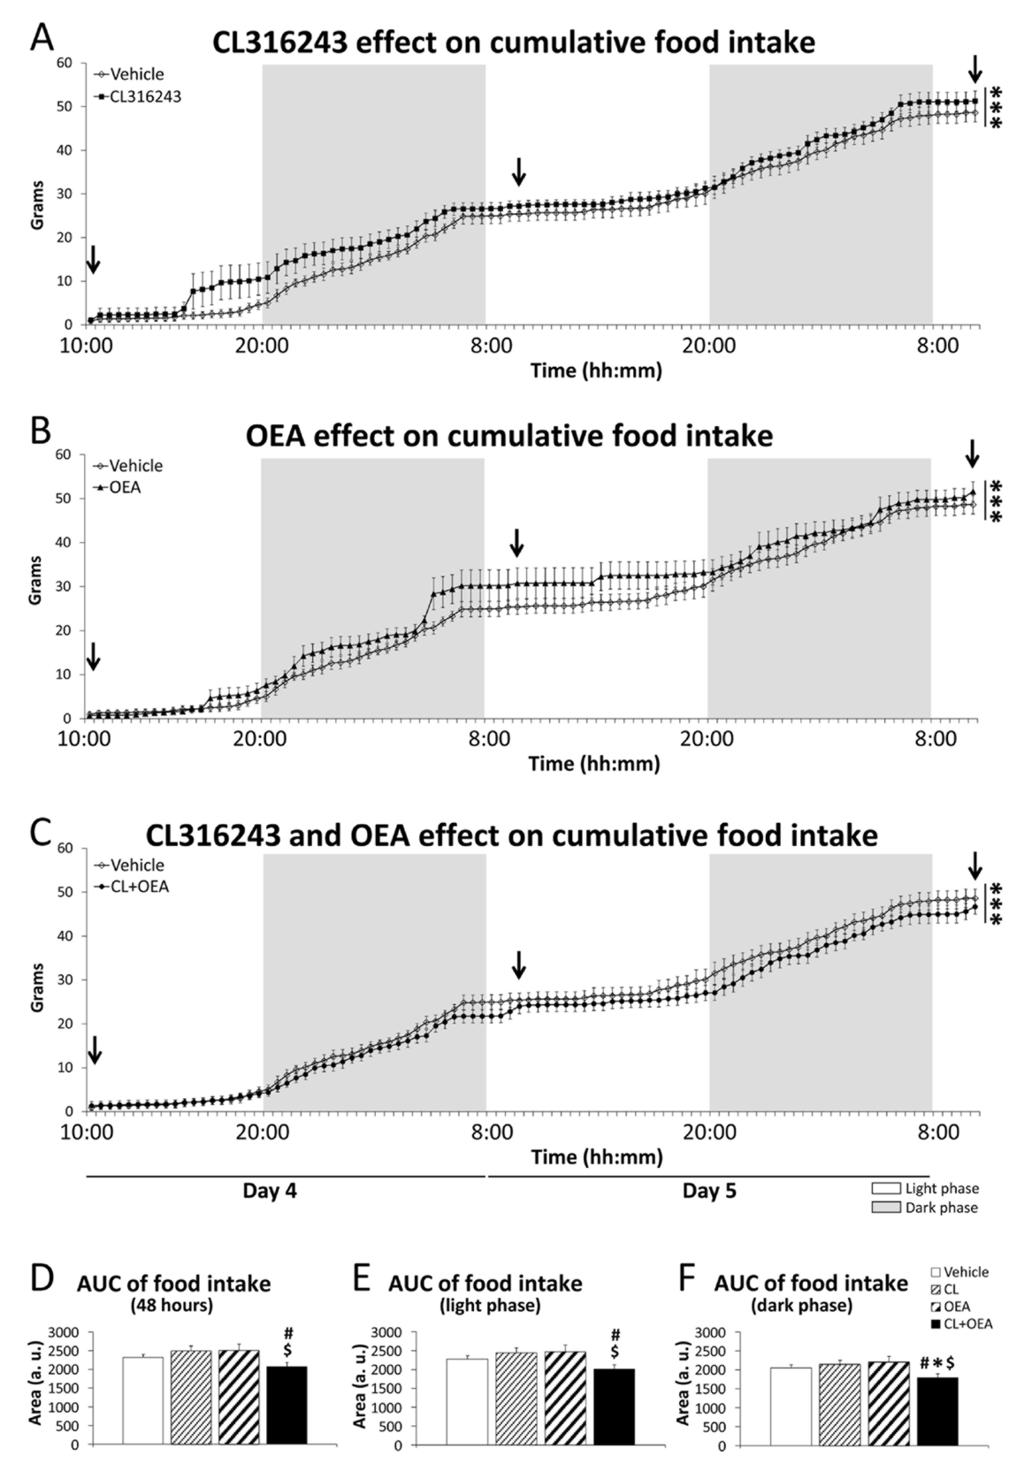 Fig. S2. Effects of repeated administration of CL316243 (1 mg/kg) and/or OEA (5 mg/kg) on cumulative food intake (A-C) for 48 hours after 4 days of treatment.